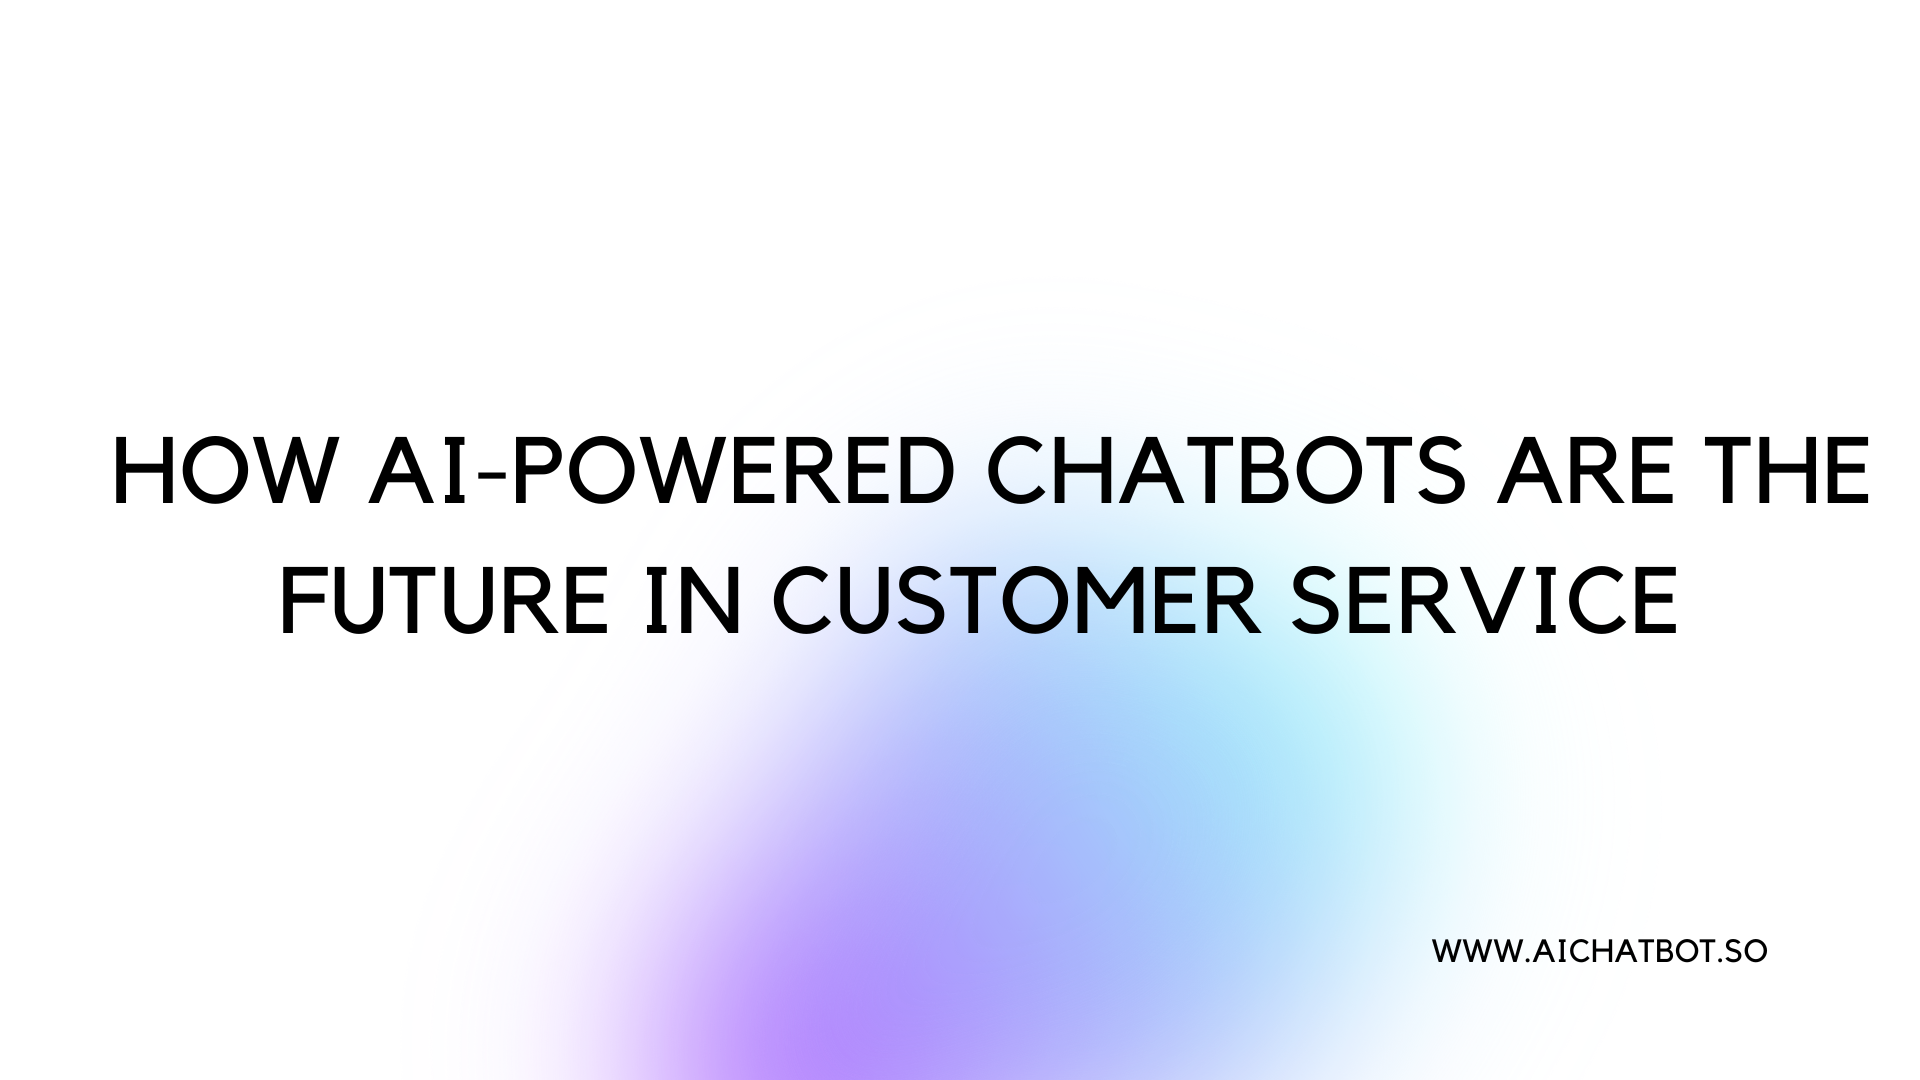 How AI-powered Chatbots are the Future in Customer Service